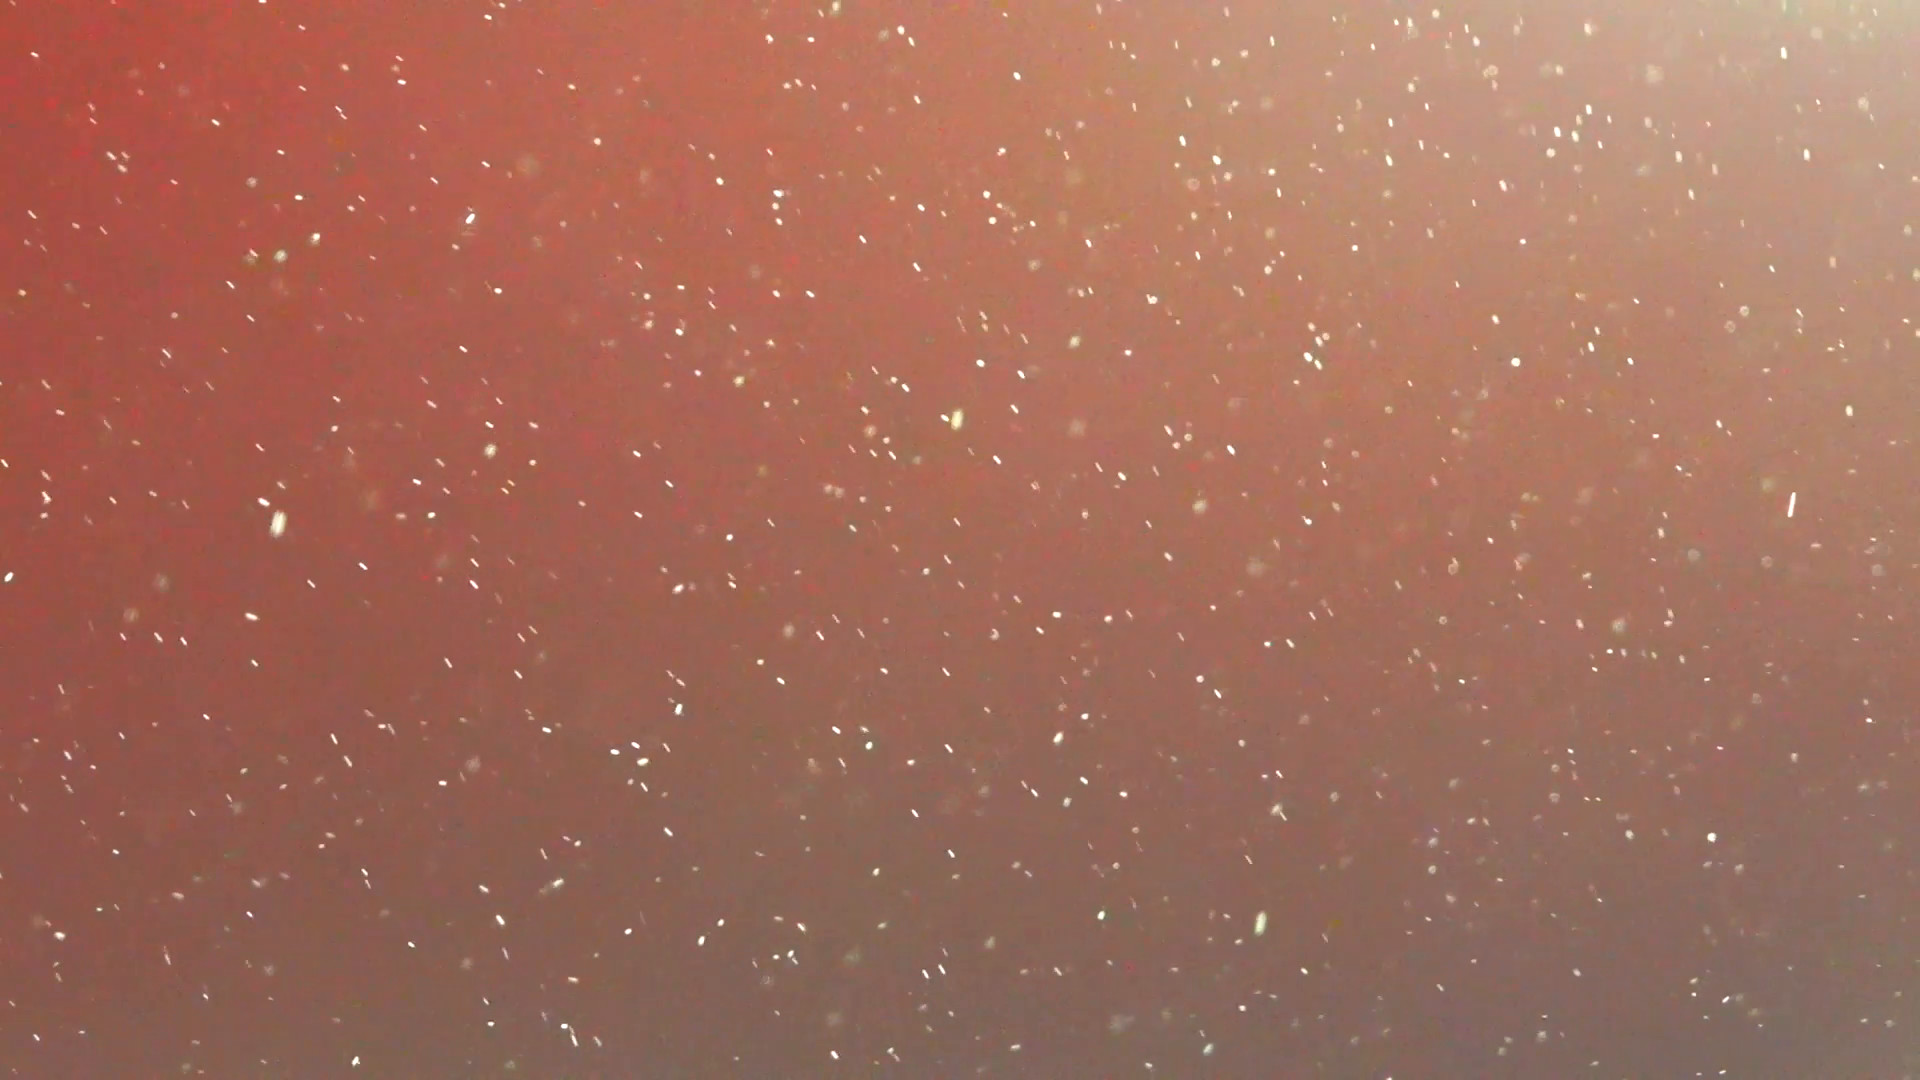 1920x1080 Subscription Library Flying particles 5 - floating dust background -  falling snowflake